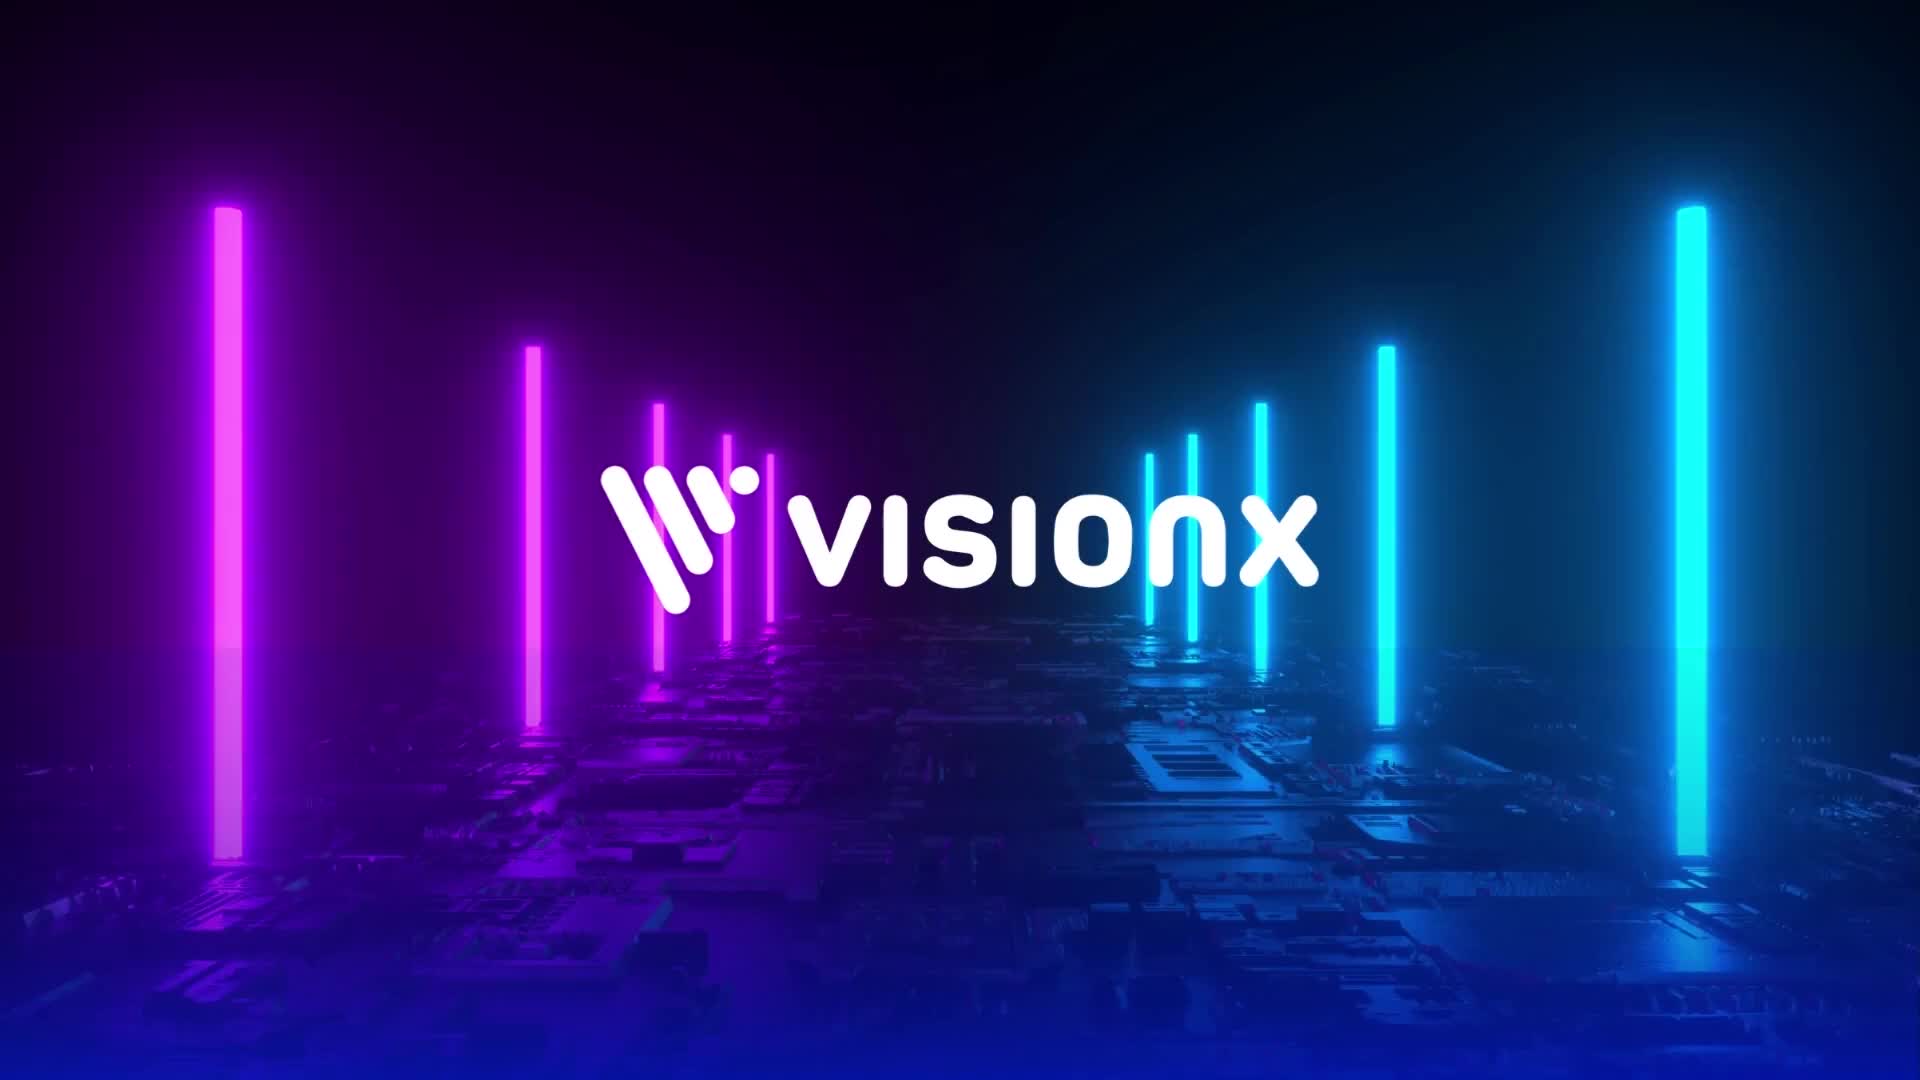 VisionX | Your Software Team for Digital Experiences